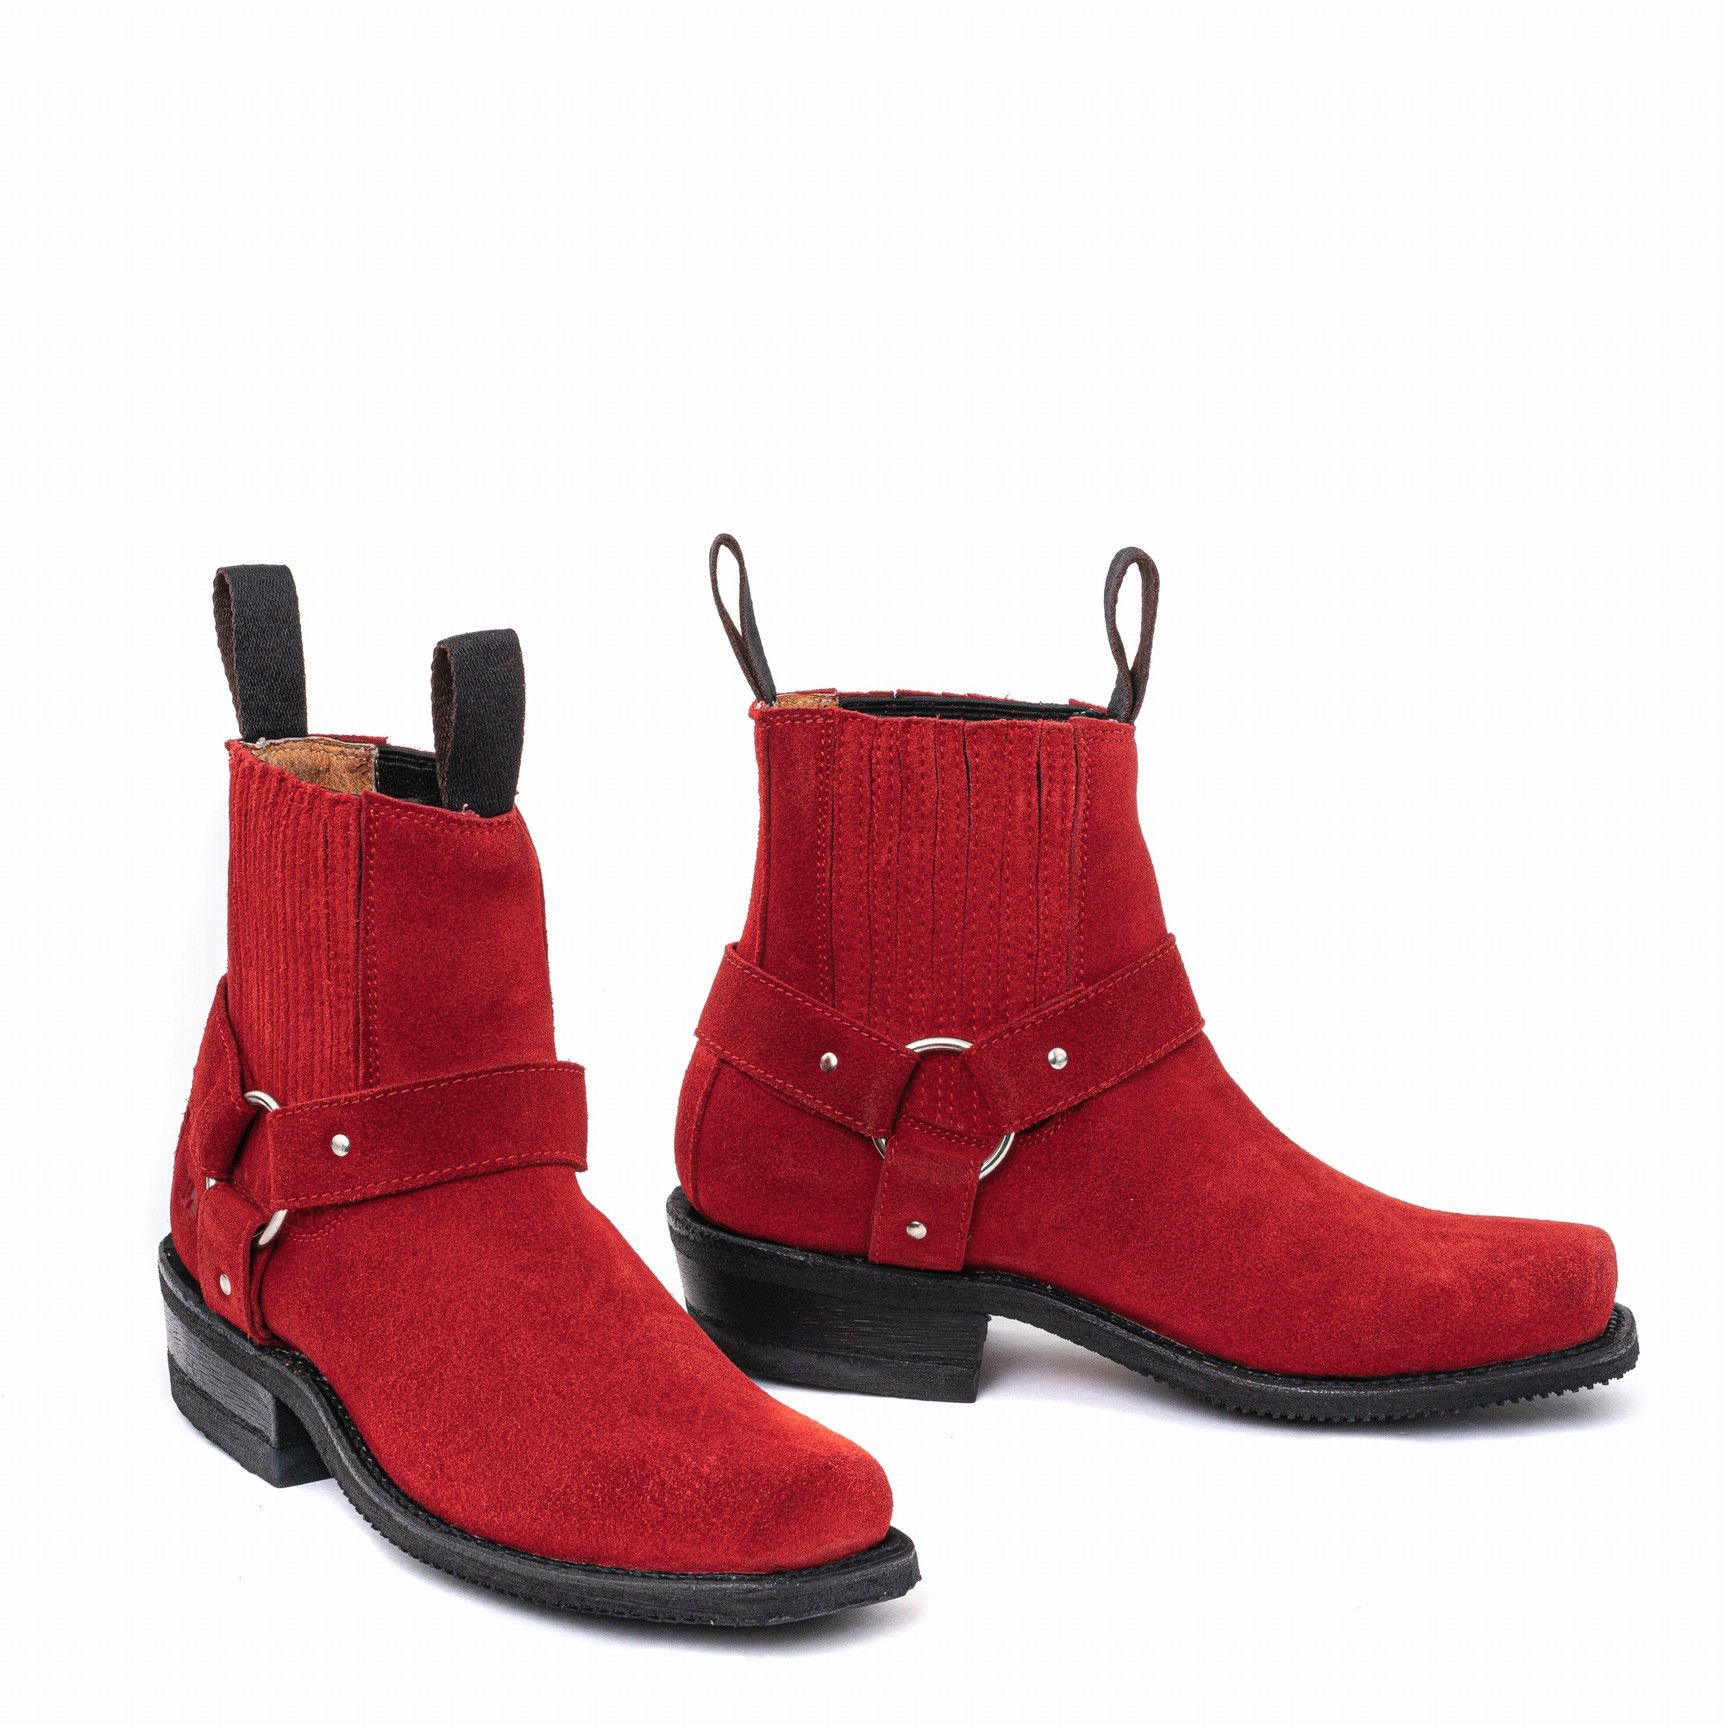 TOLTECA BOOTS GAMUZA ROJA THIS STYLE RUNS SMALL, ORDER 1 SIZE UP THAN YOUR USUAL SIZE        SQUARE TOE BOOTIES WITH LEATHER STR